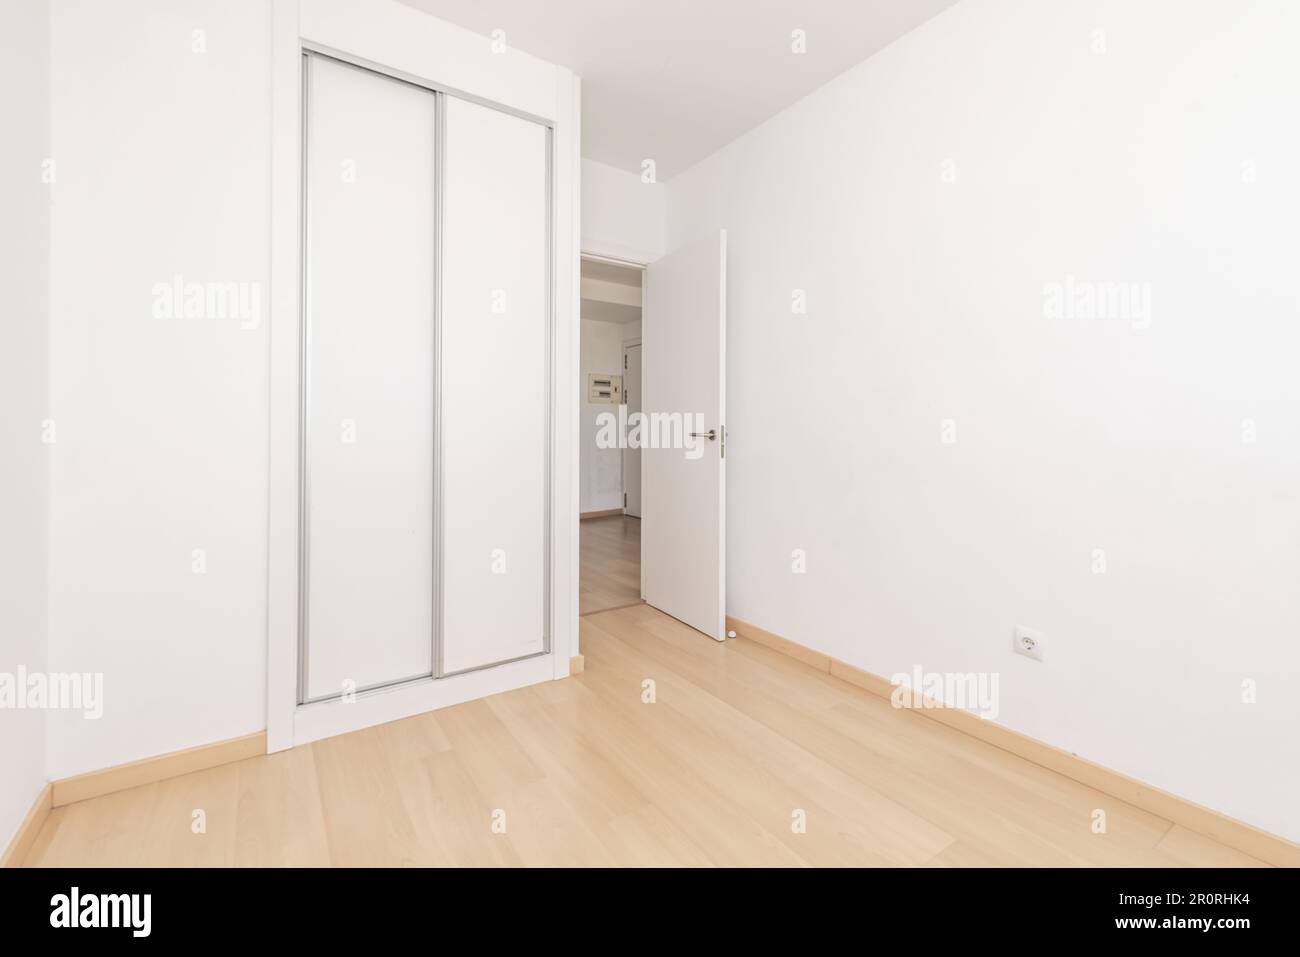 An empty room in an apartment with a built-in wardrobe with white sliding doors Stock Photo